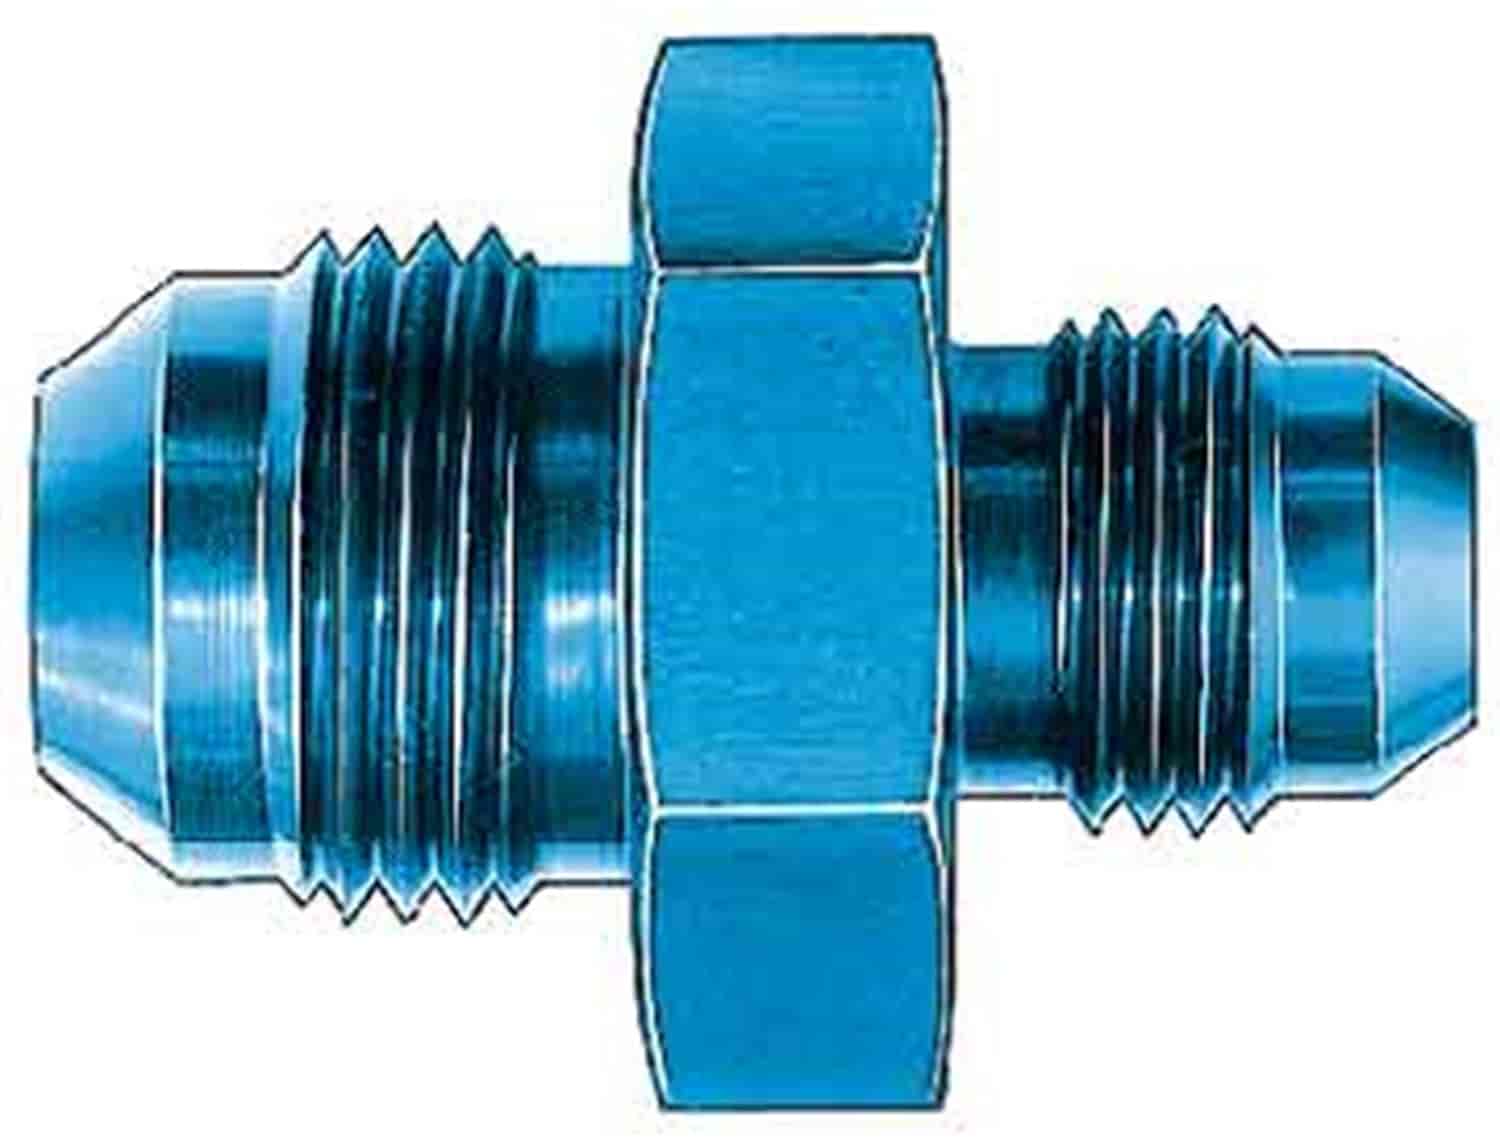 Union Reducer -08AN To -06AN